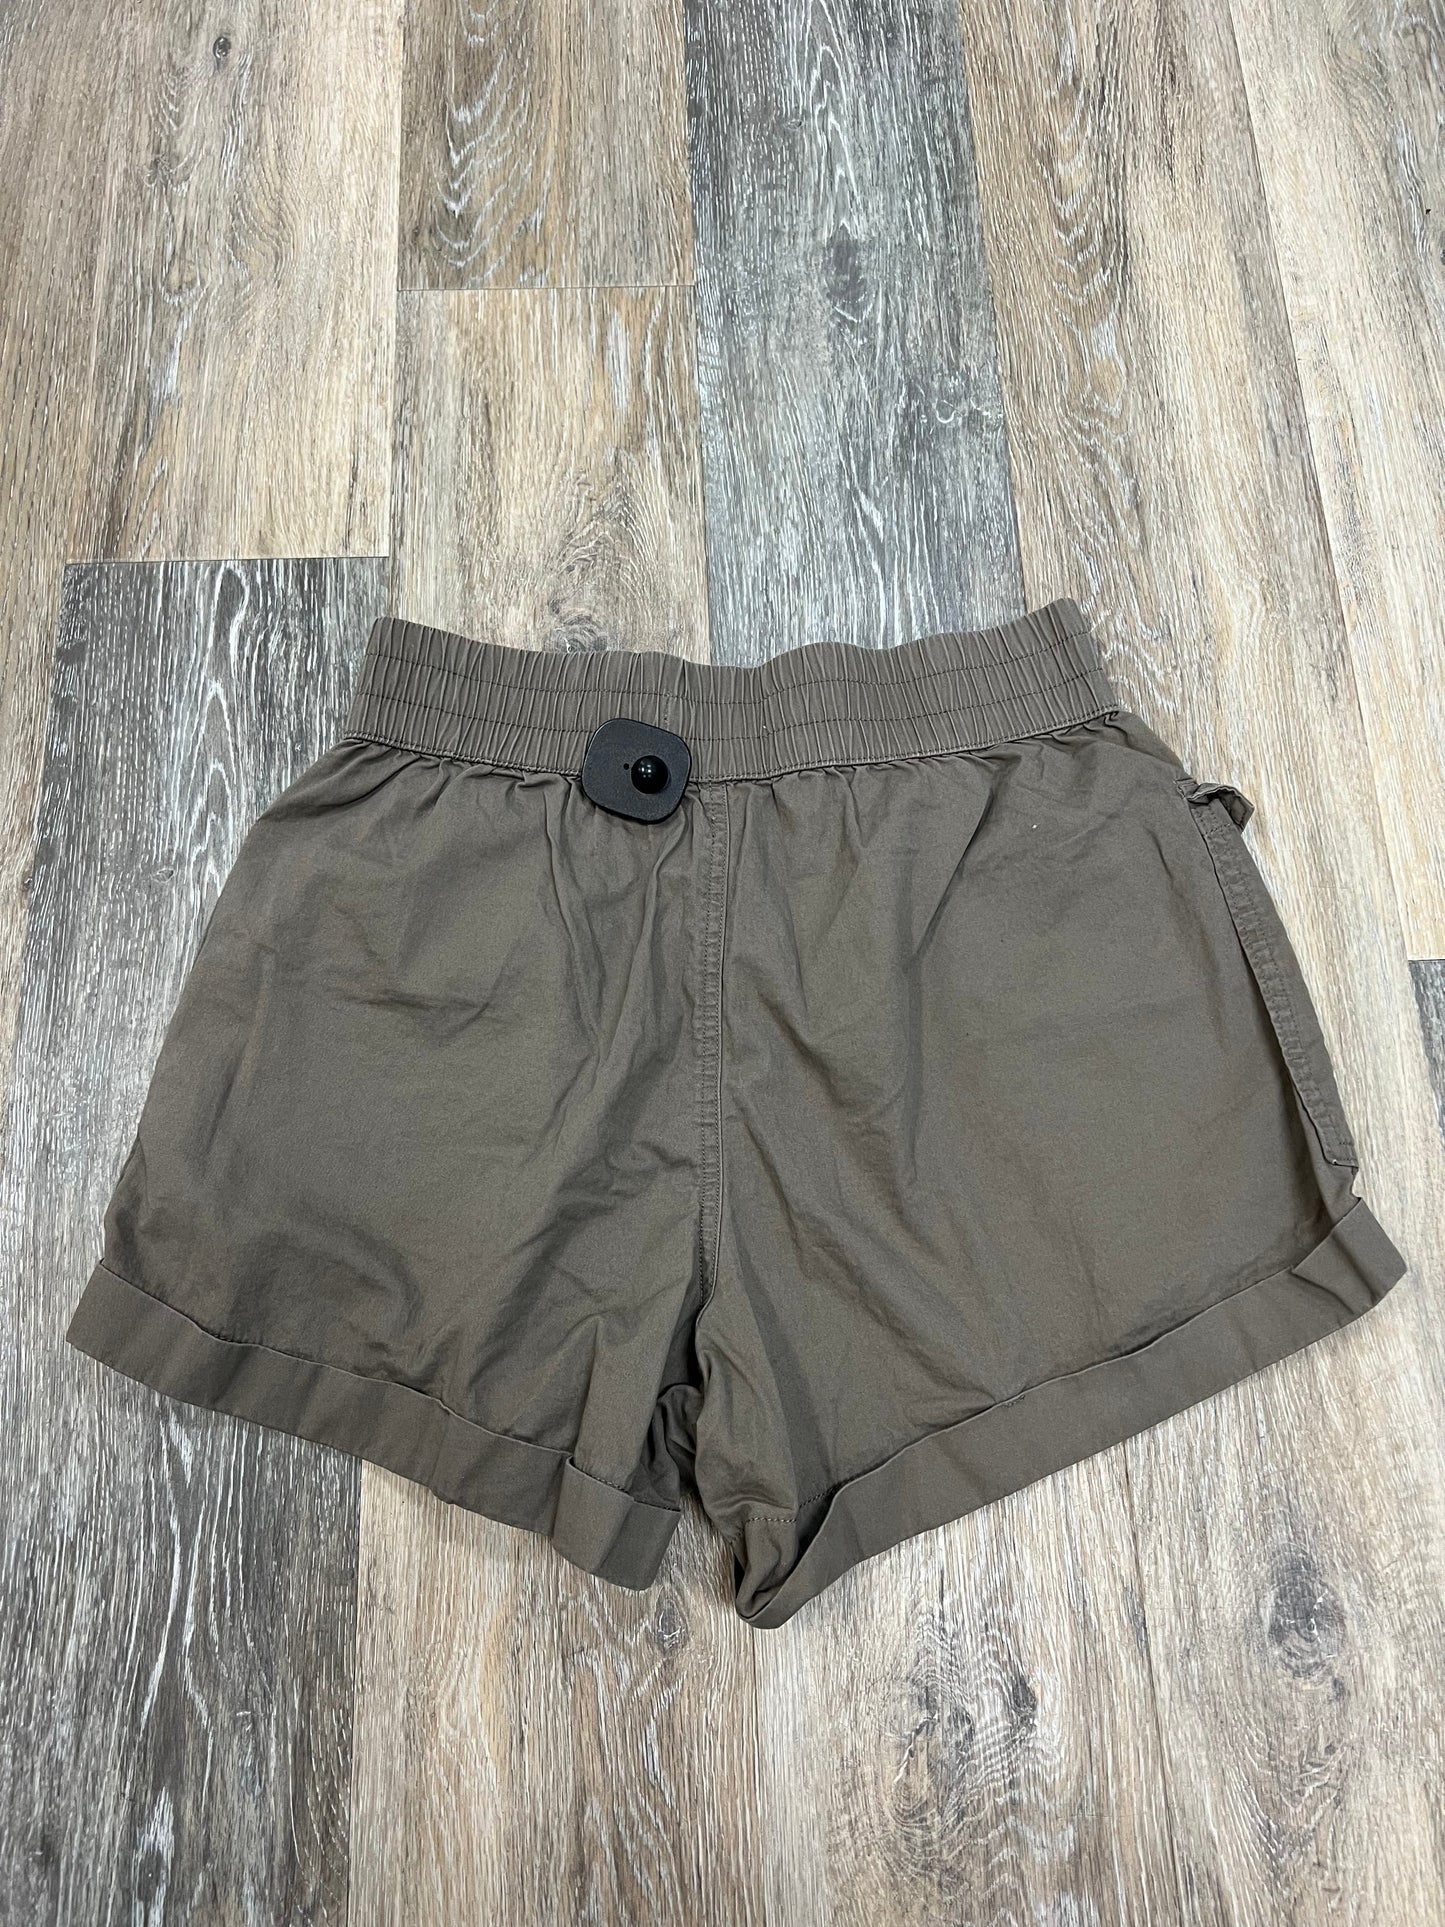 Brown Shorts Abercrombie And Fitch, Size S